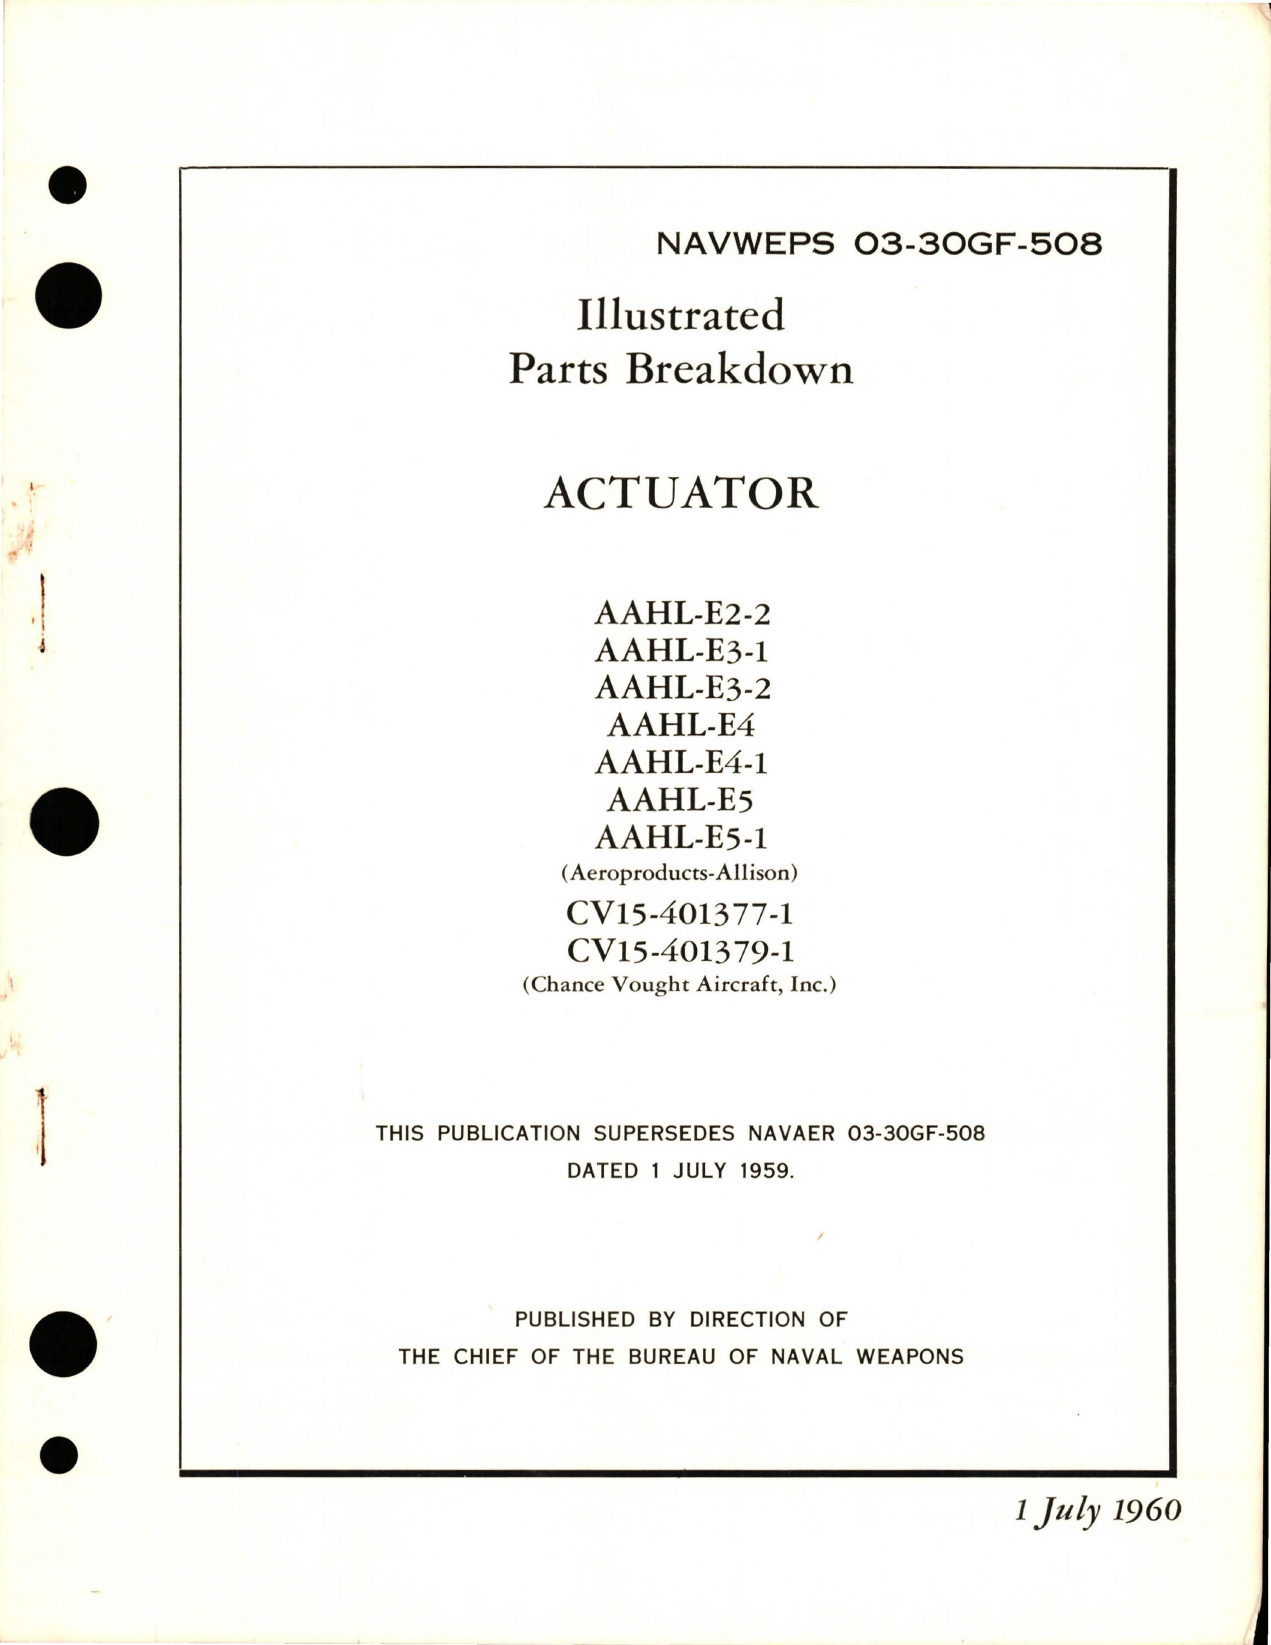 Sample page 1 from AirCorps Library document: Illustrated Parts Breakdown for Actuator